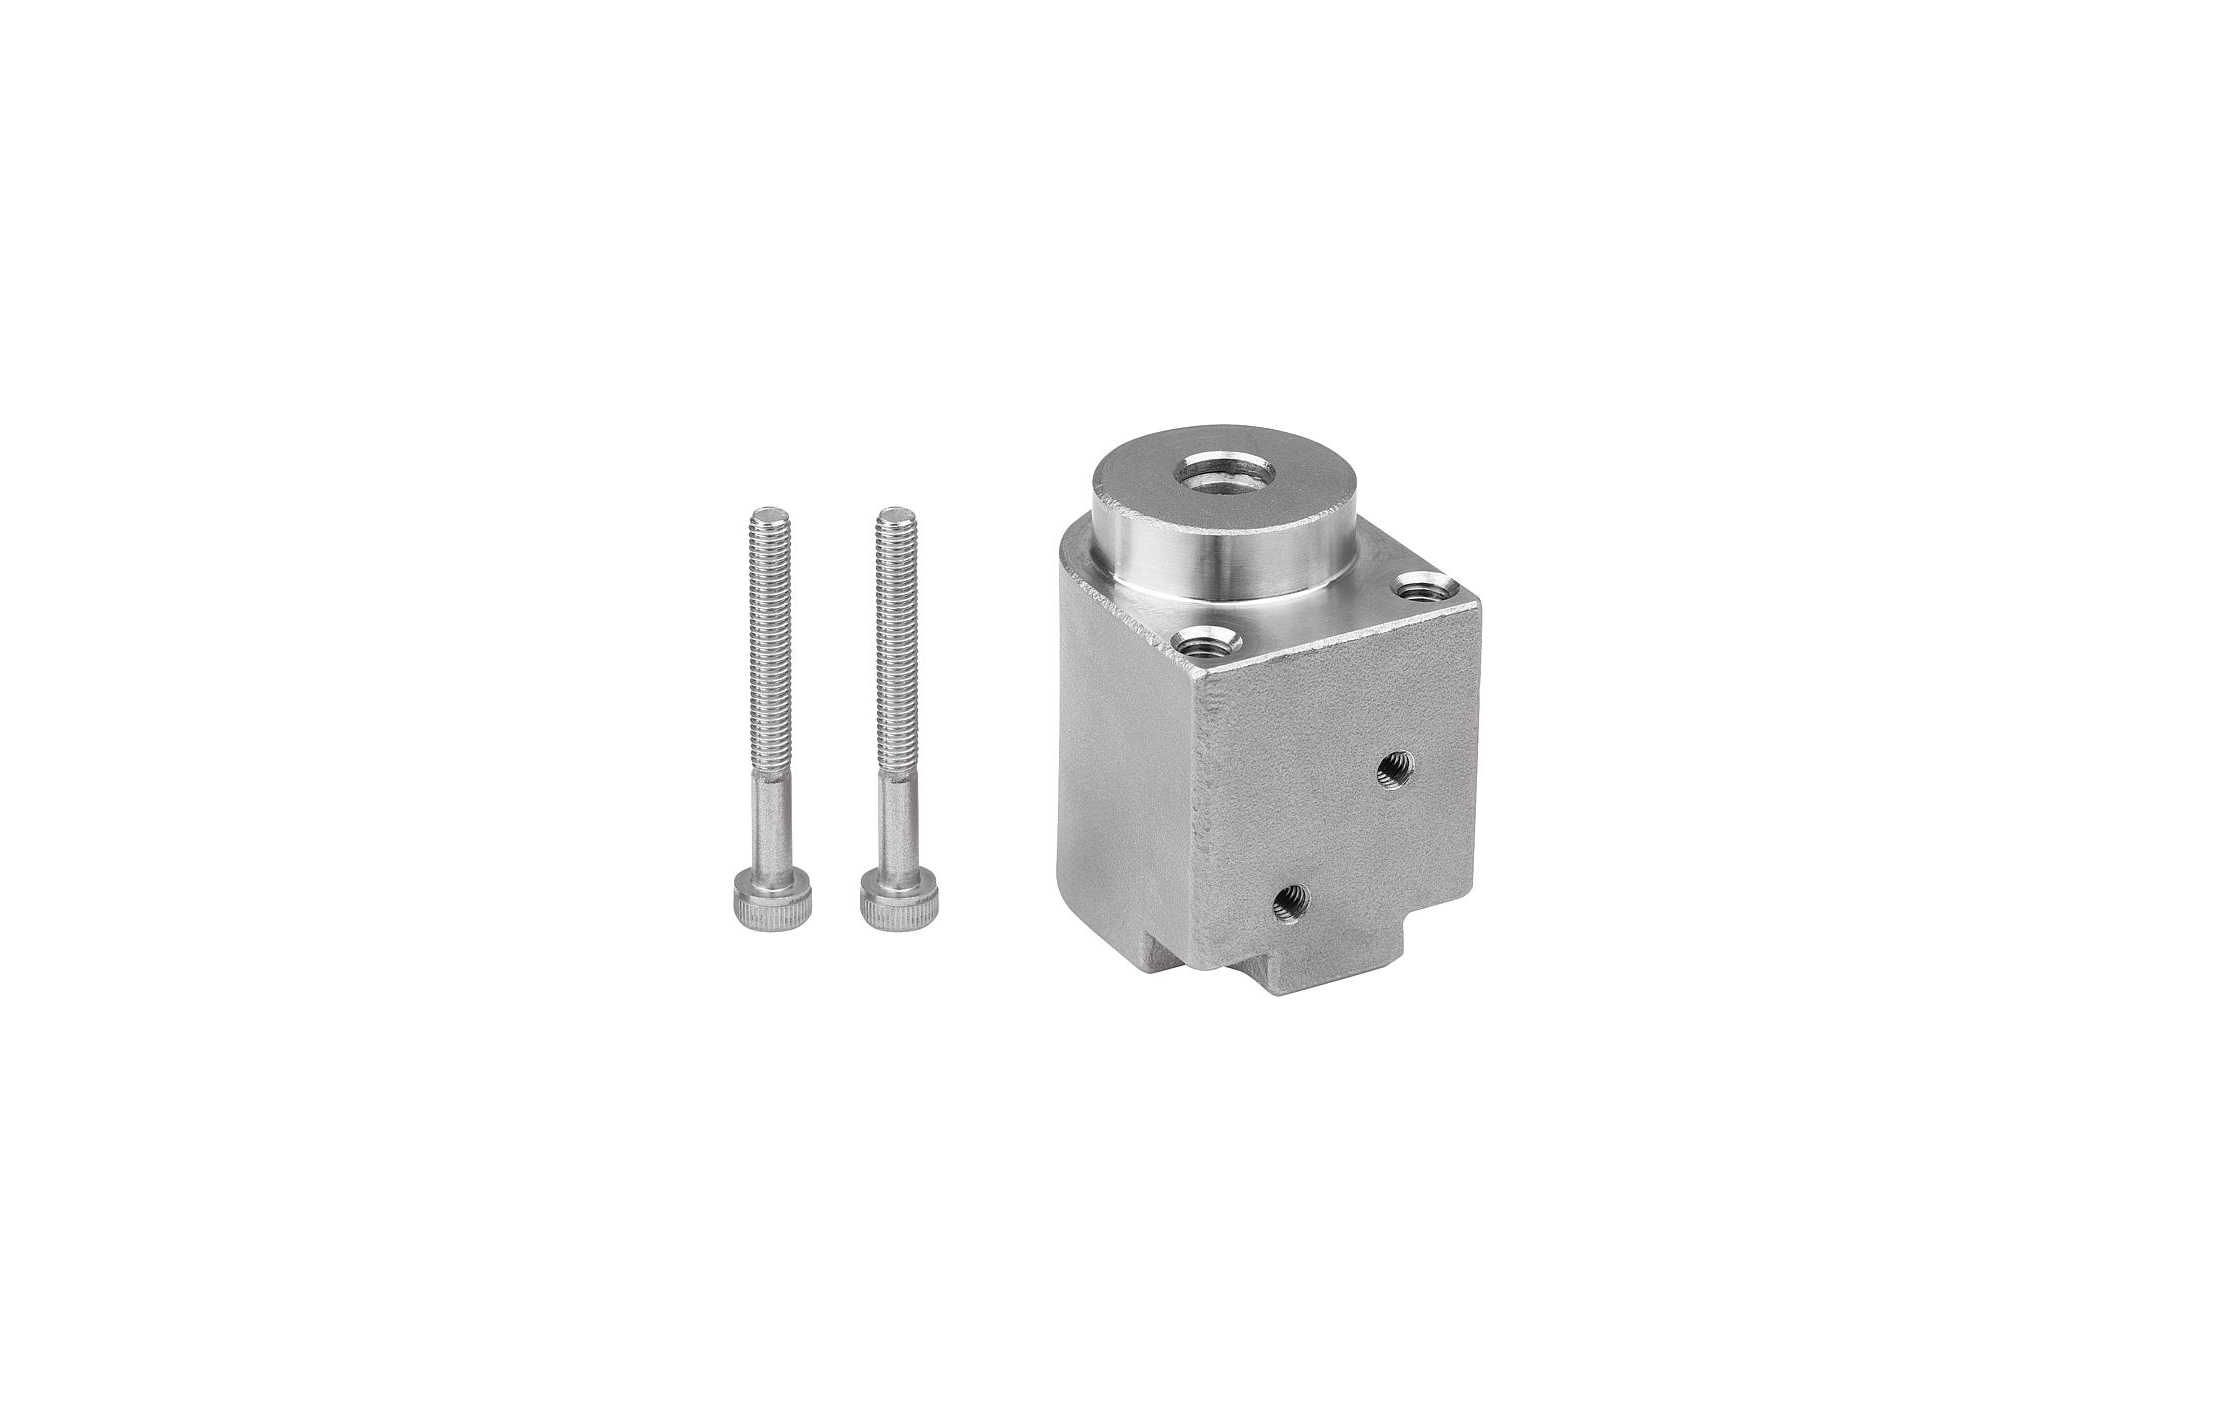 K1741 Locating adapters, flange, stainless steel, pneumatic